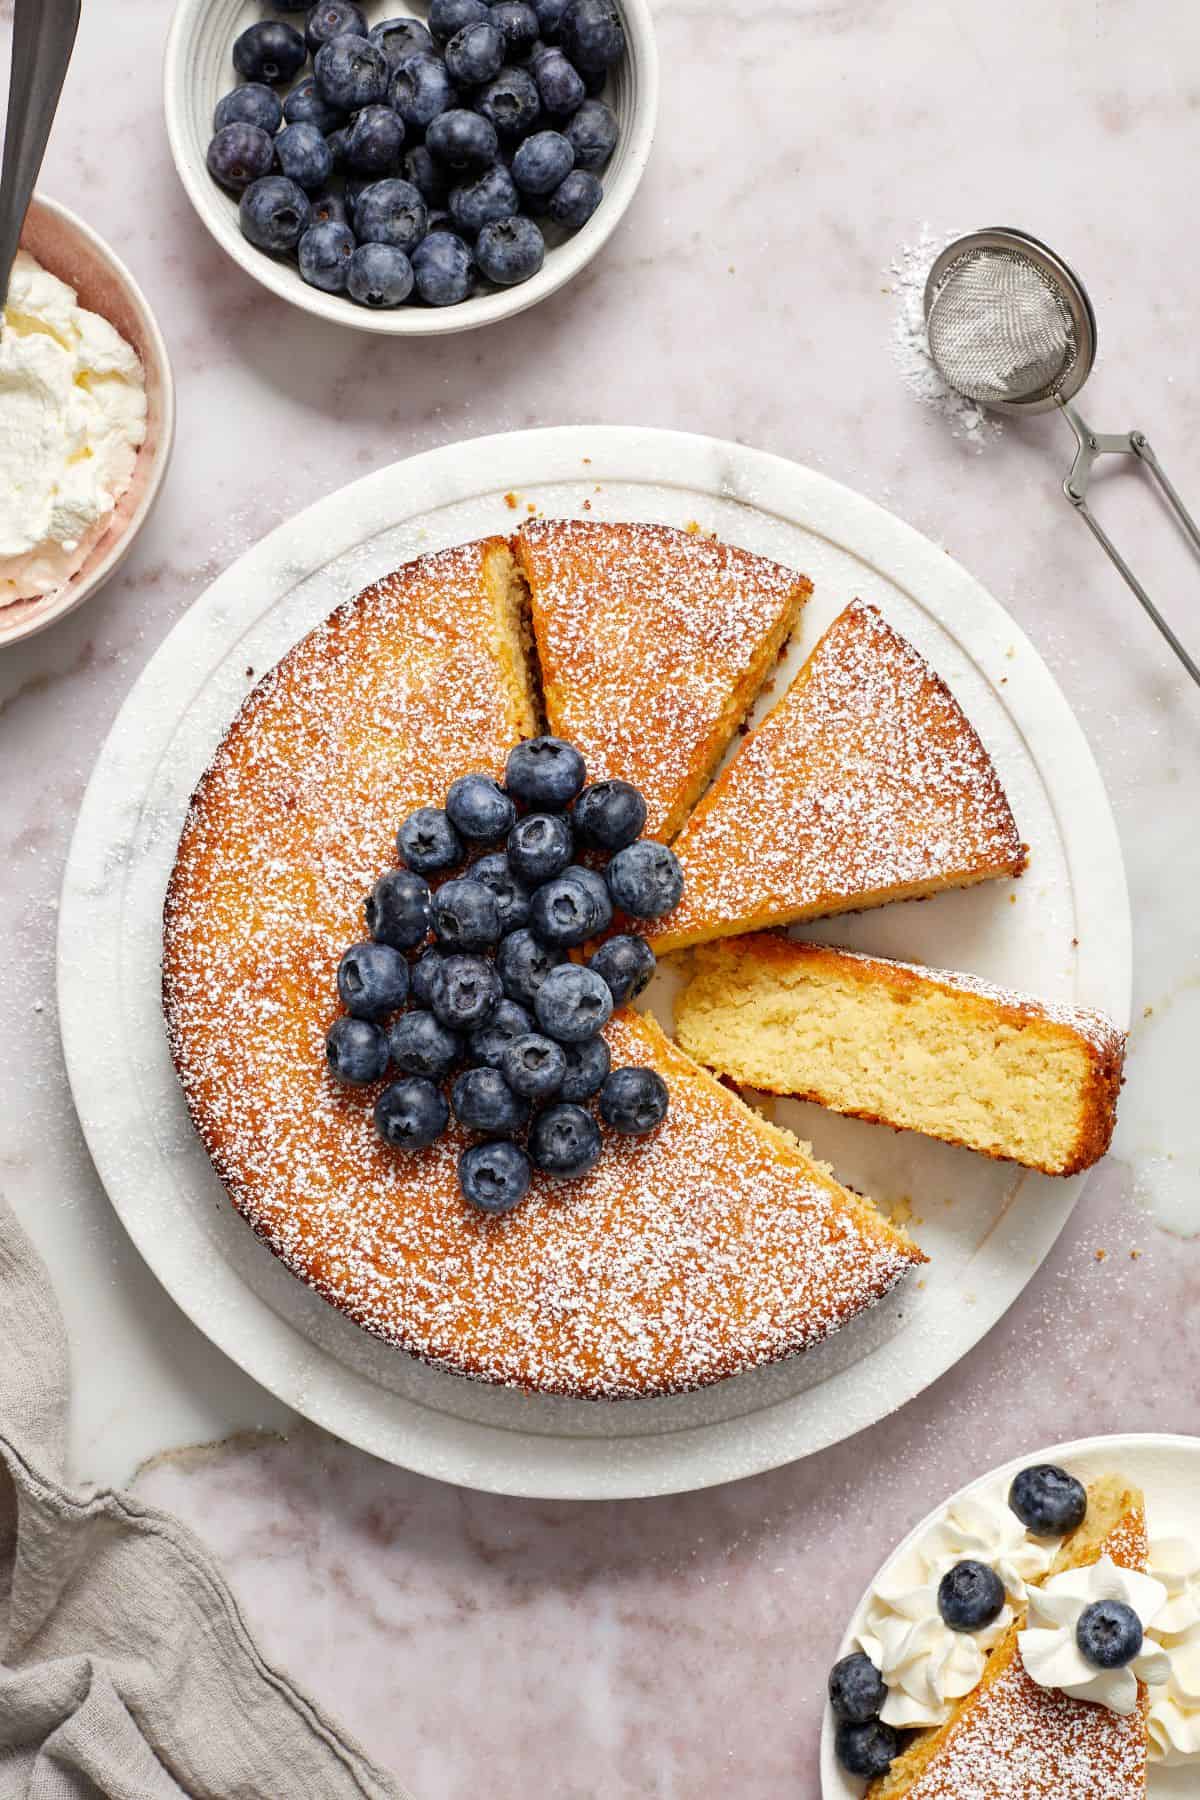 Almond Flour Cake topped with fresh blueberries, with three pieces cut, one lying on side to show texture of cake.